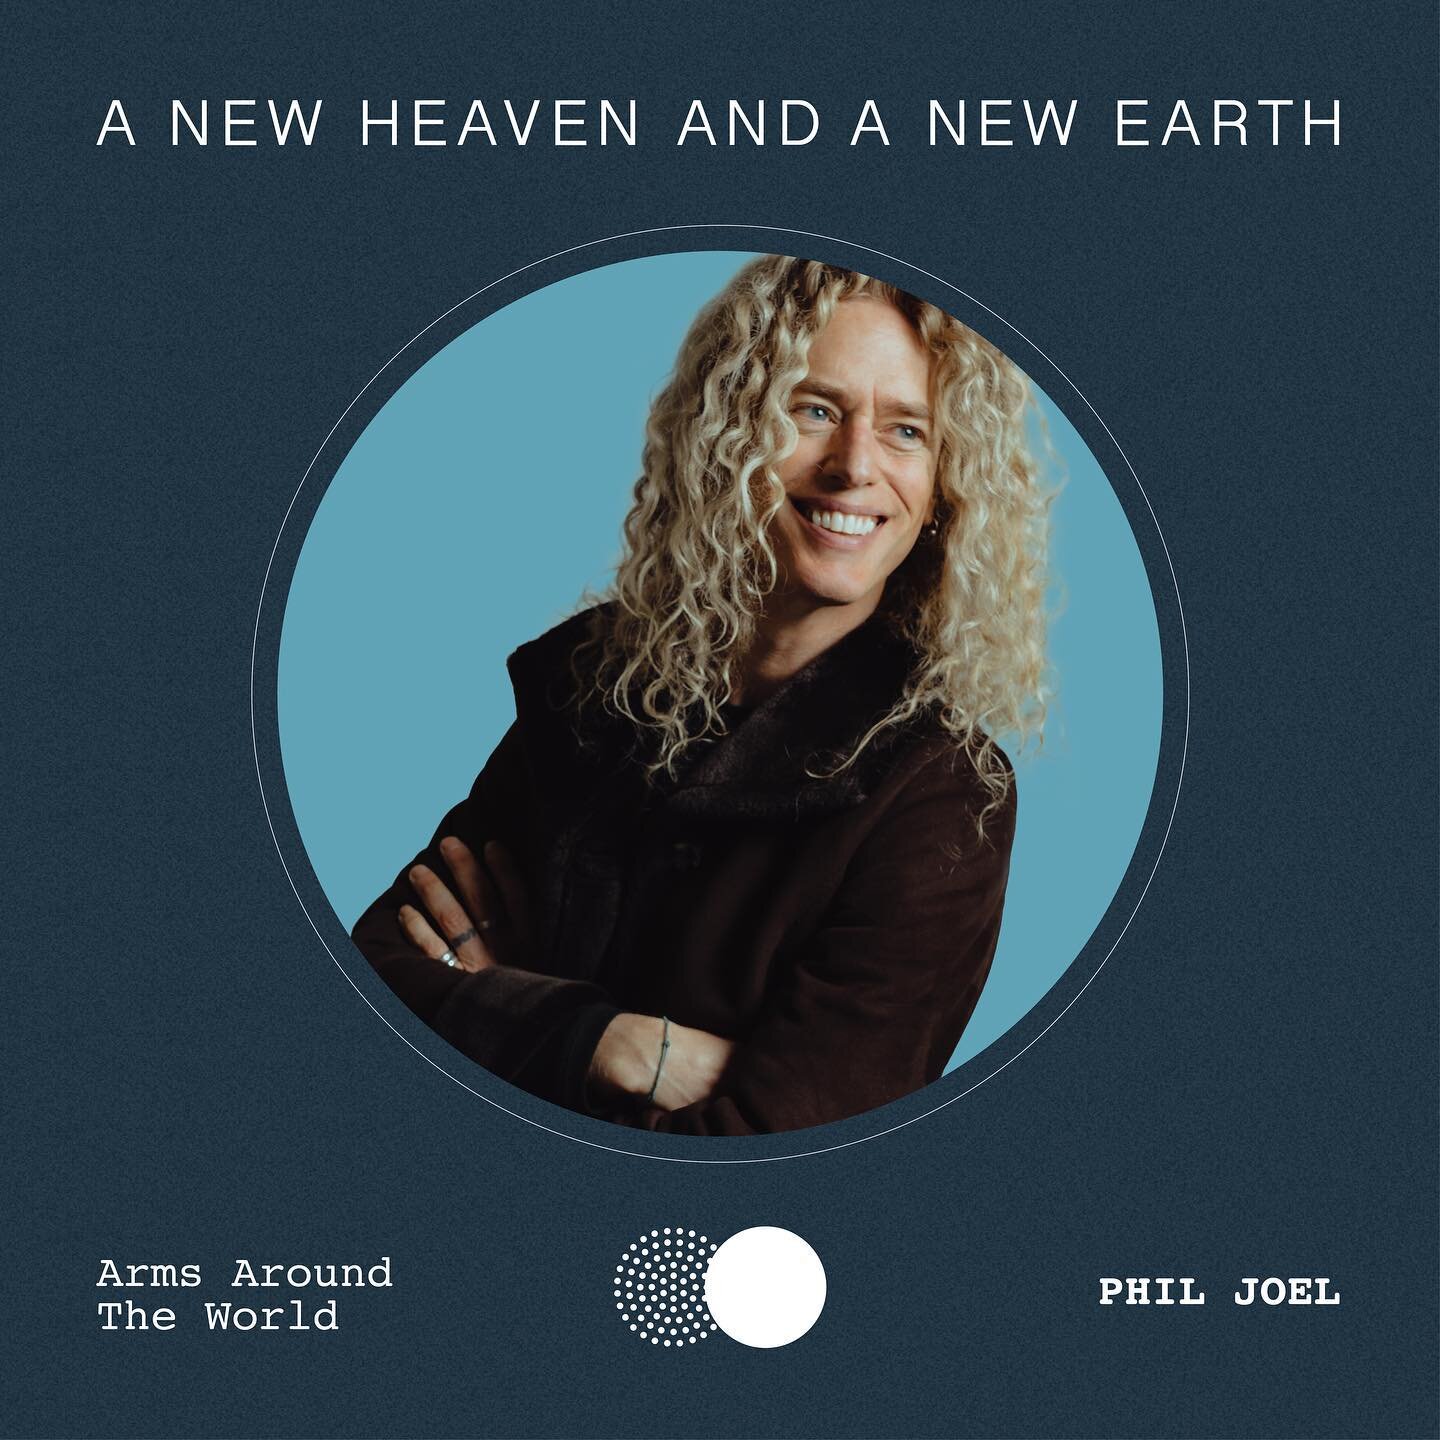 @philjoelofficial just released his wonderful addition to A New Heaven and A New Earth on Friday. &ldquo;Arms Around the World&rdquo; is out now! Link in bio!!